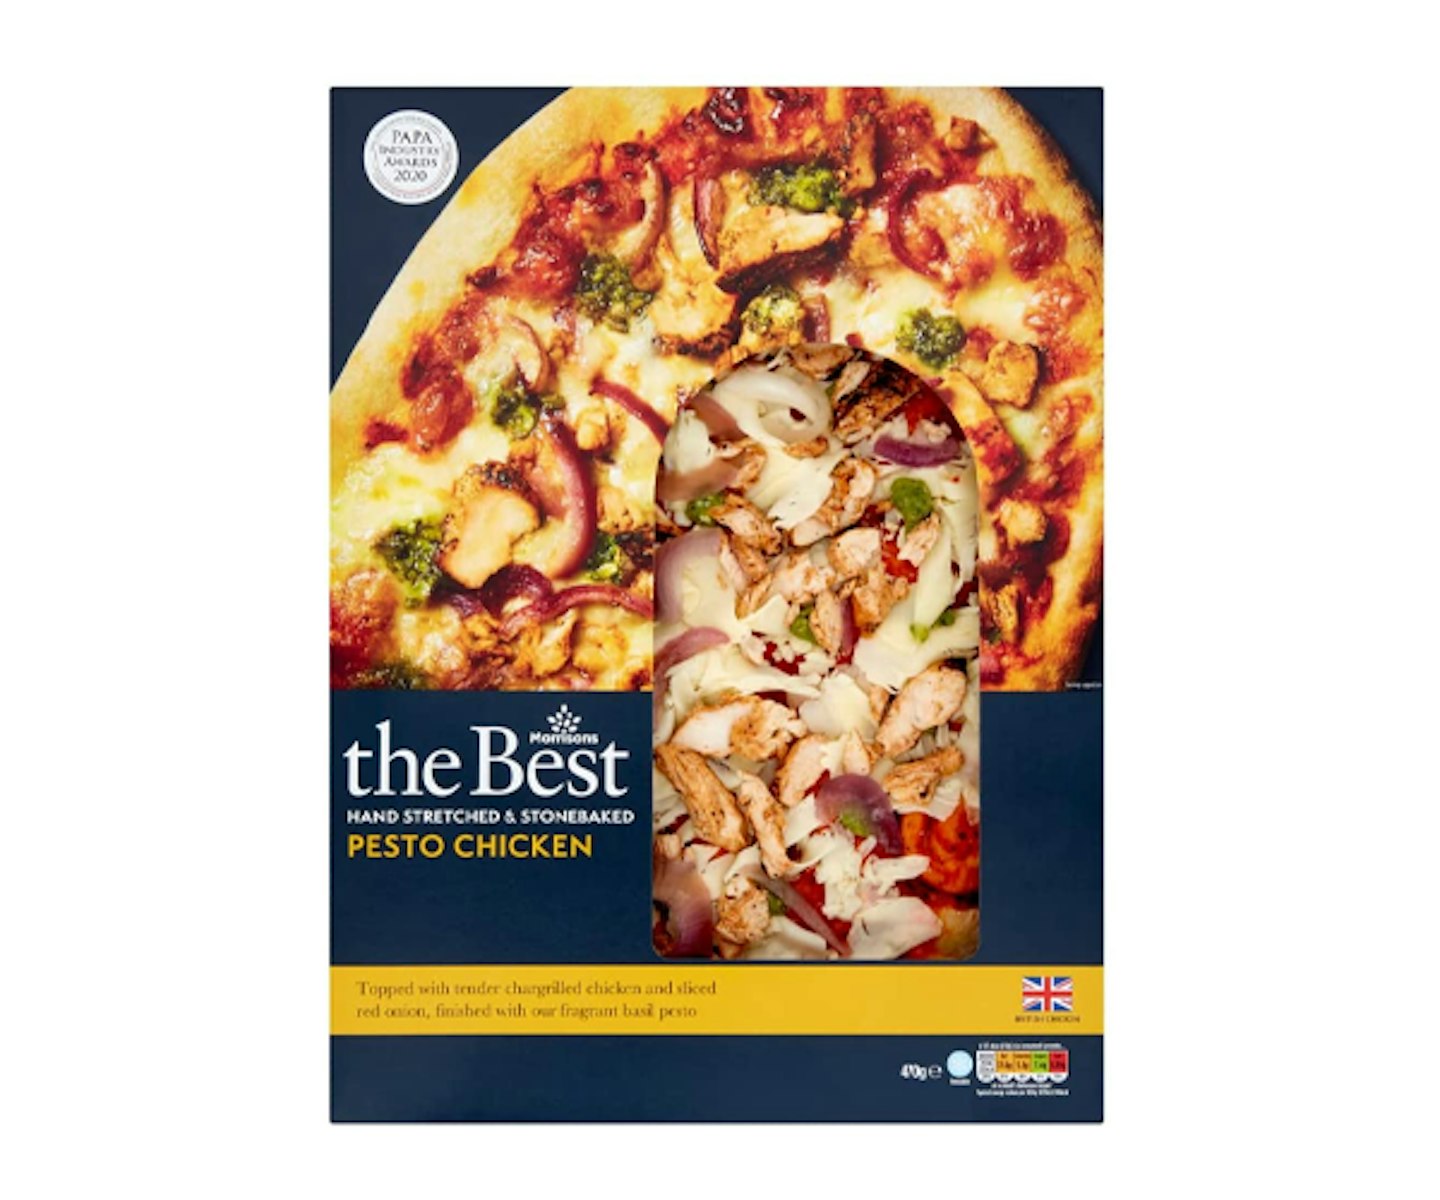 Morrisons The Best Hand Stretched & Stonebaked Pesto Chicken Pizza